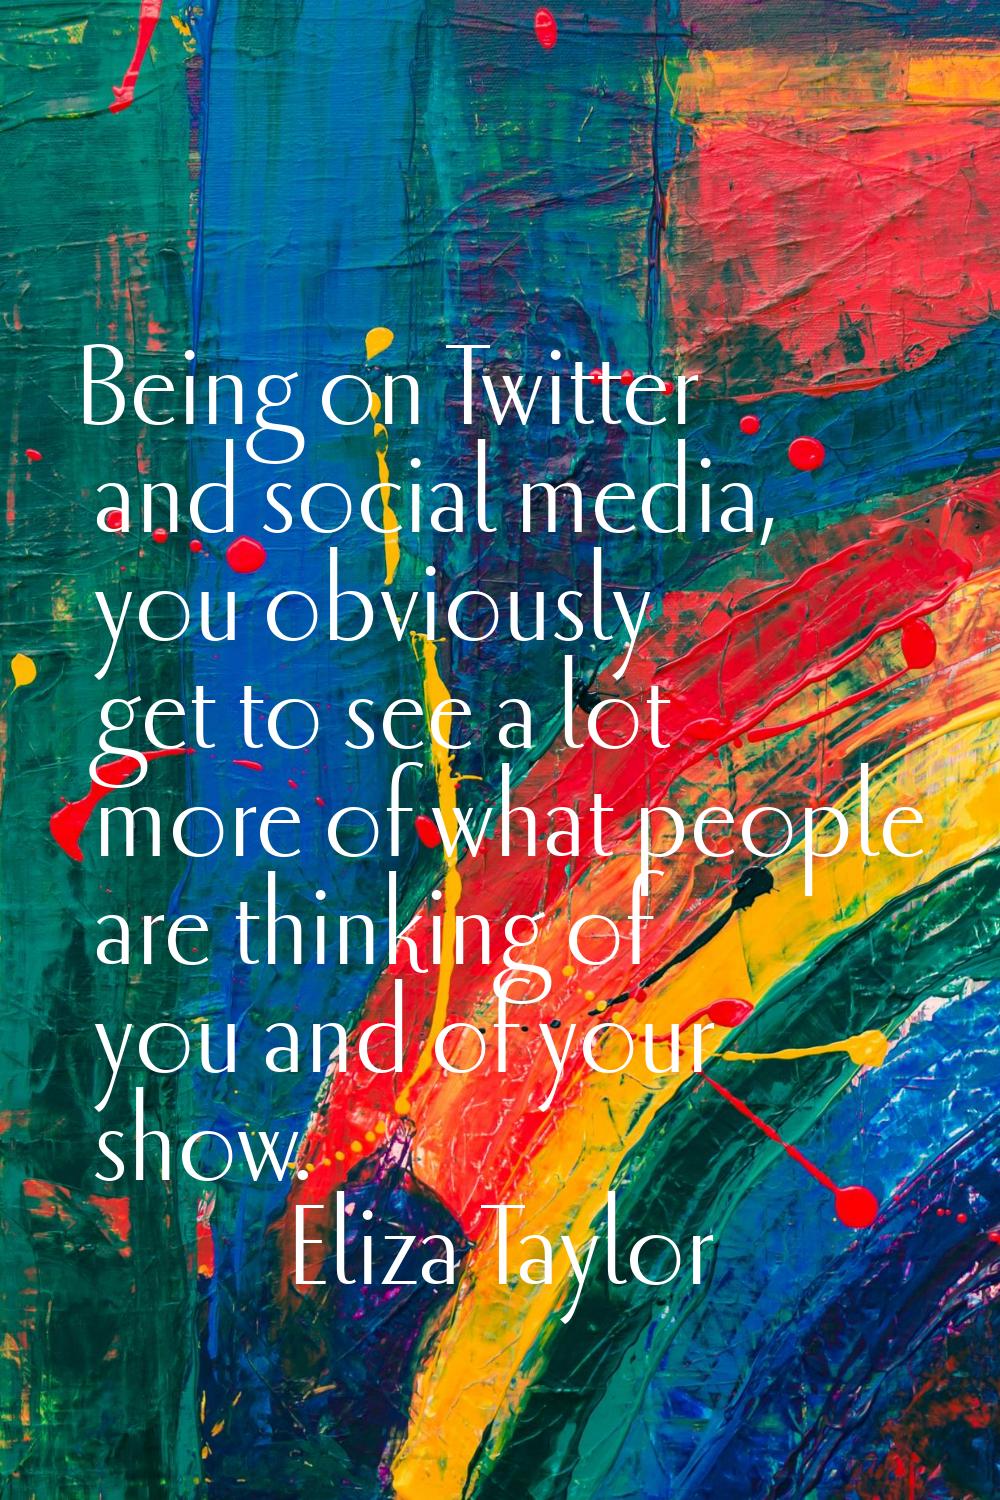 Being on Twitter and social media, you obviously get to see a lot more of what people are thinking 